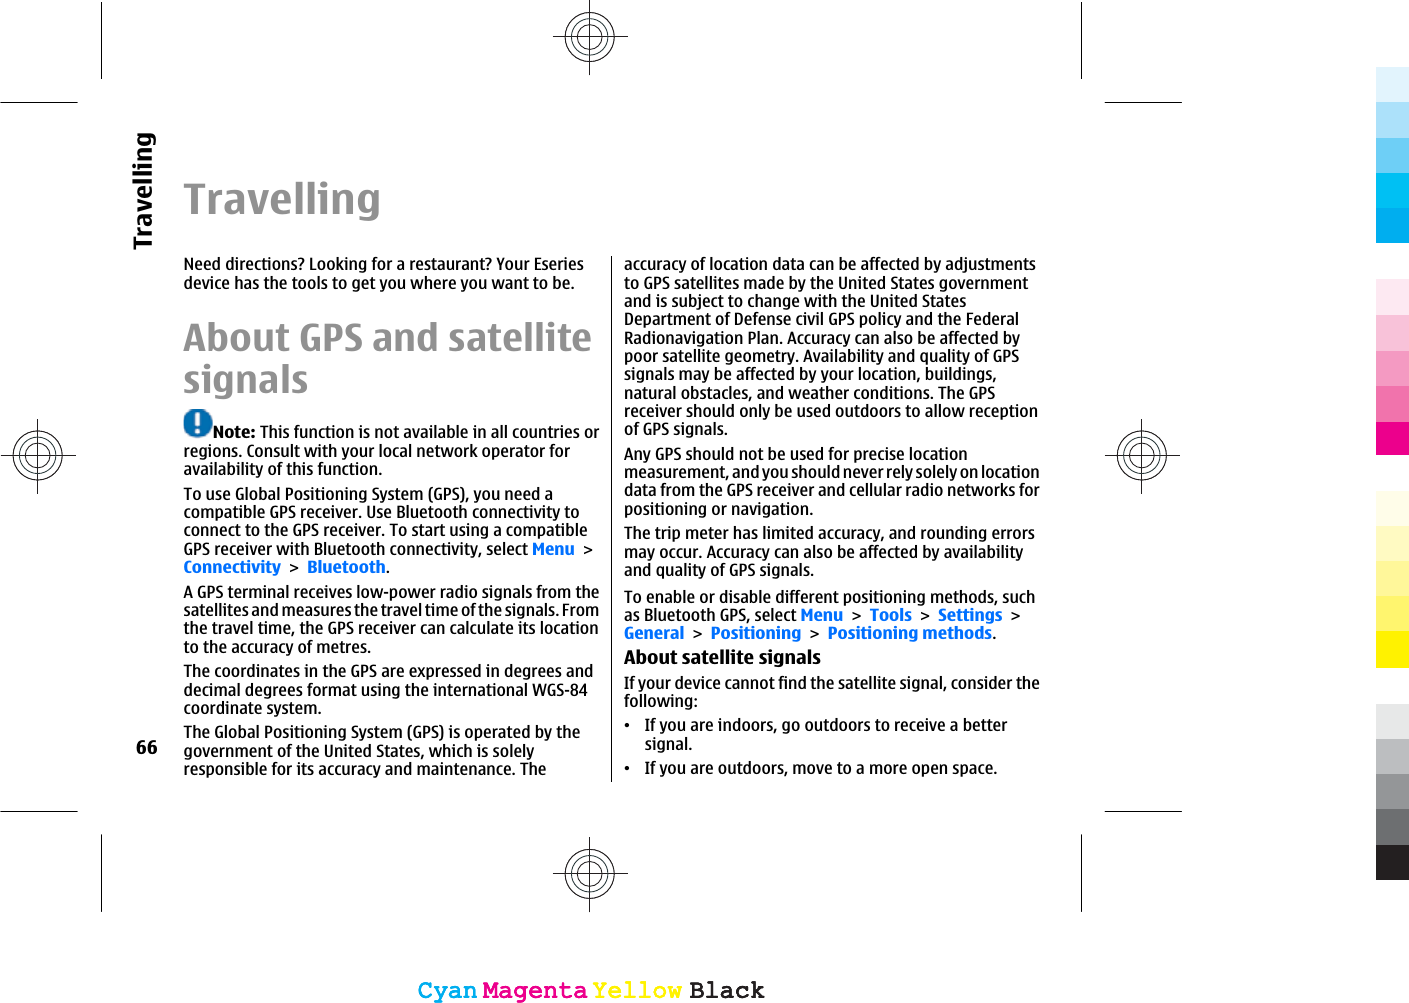 TravellingNeed directions? Looking for a restaurant? Your Eseriesdevice has the tools to get you where you want to be.About GPS and satellitesignalsNote: This function is not available in all countries orregions. Consult with your local network operator foravailability of this function.To use Global Positioning System (GPS), you need acompatible GPS receiver. Use Bluetooth connectivity toconnect to the GPS receiver. To start using a compatibleGPS receiver with Bluetooth connectivity, select MenuConnectivityBluetooth.A GPS terminal receives low-power radio signals from thesatellites and measures the travel time of the signals. Fromthe travel time, the GPS receiver can calculate its locationto the accuracy of metres.The coordinates in the GPS are expressed in degrees anddecimal degrees format using the international WGS-84coordinate system.The Global Positioning System (GPS) is operated by thegovernment of the United States, which is solelyresponsible for its accuracy and maintenance. Theaccuracy of location data can be affected by adjustmentsto GPS satellites made by the United States governmentand is subject to change with the United StatesDepartment of Defense civil GPS policy and the FederalRadionavigation Plan. Accuracy can also be affected bypoor satellite geometry. Availability and quality of GPSsignals may be affected by your location, buildings,natural obstacles, and weather conditions. The GPSreceiver should only be used outdoors to allow receptionof GPS signals.Any GPS should not be used for precise locationmeasurement, and you should never rely solely on locationdata from the GPS receiver and cellular radio networks forpositioning or navigation.The trip meter has limited accuracy, and rounding errorsmay occur. Accuracy can also be affected by availabilityand quality of GPS signals.To enable or disable different positioning methods, suchas Bluetooth GPS, select MenuToolsSettingsGeneralPositioningPositioning methods.About satellite signalsIf your device cannot find the satellite signal, consider thefollowing:ವIf you are indoors, go outdoors to receive a bettersignal.ವIf you are outdoors, move to a more open space.66TravellingCyanCyanMagentaMagentaYellowYellowBlackBlackCyanCyanMagentaMagentaYellowYellowBlackBlack